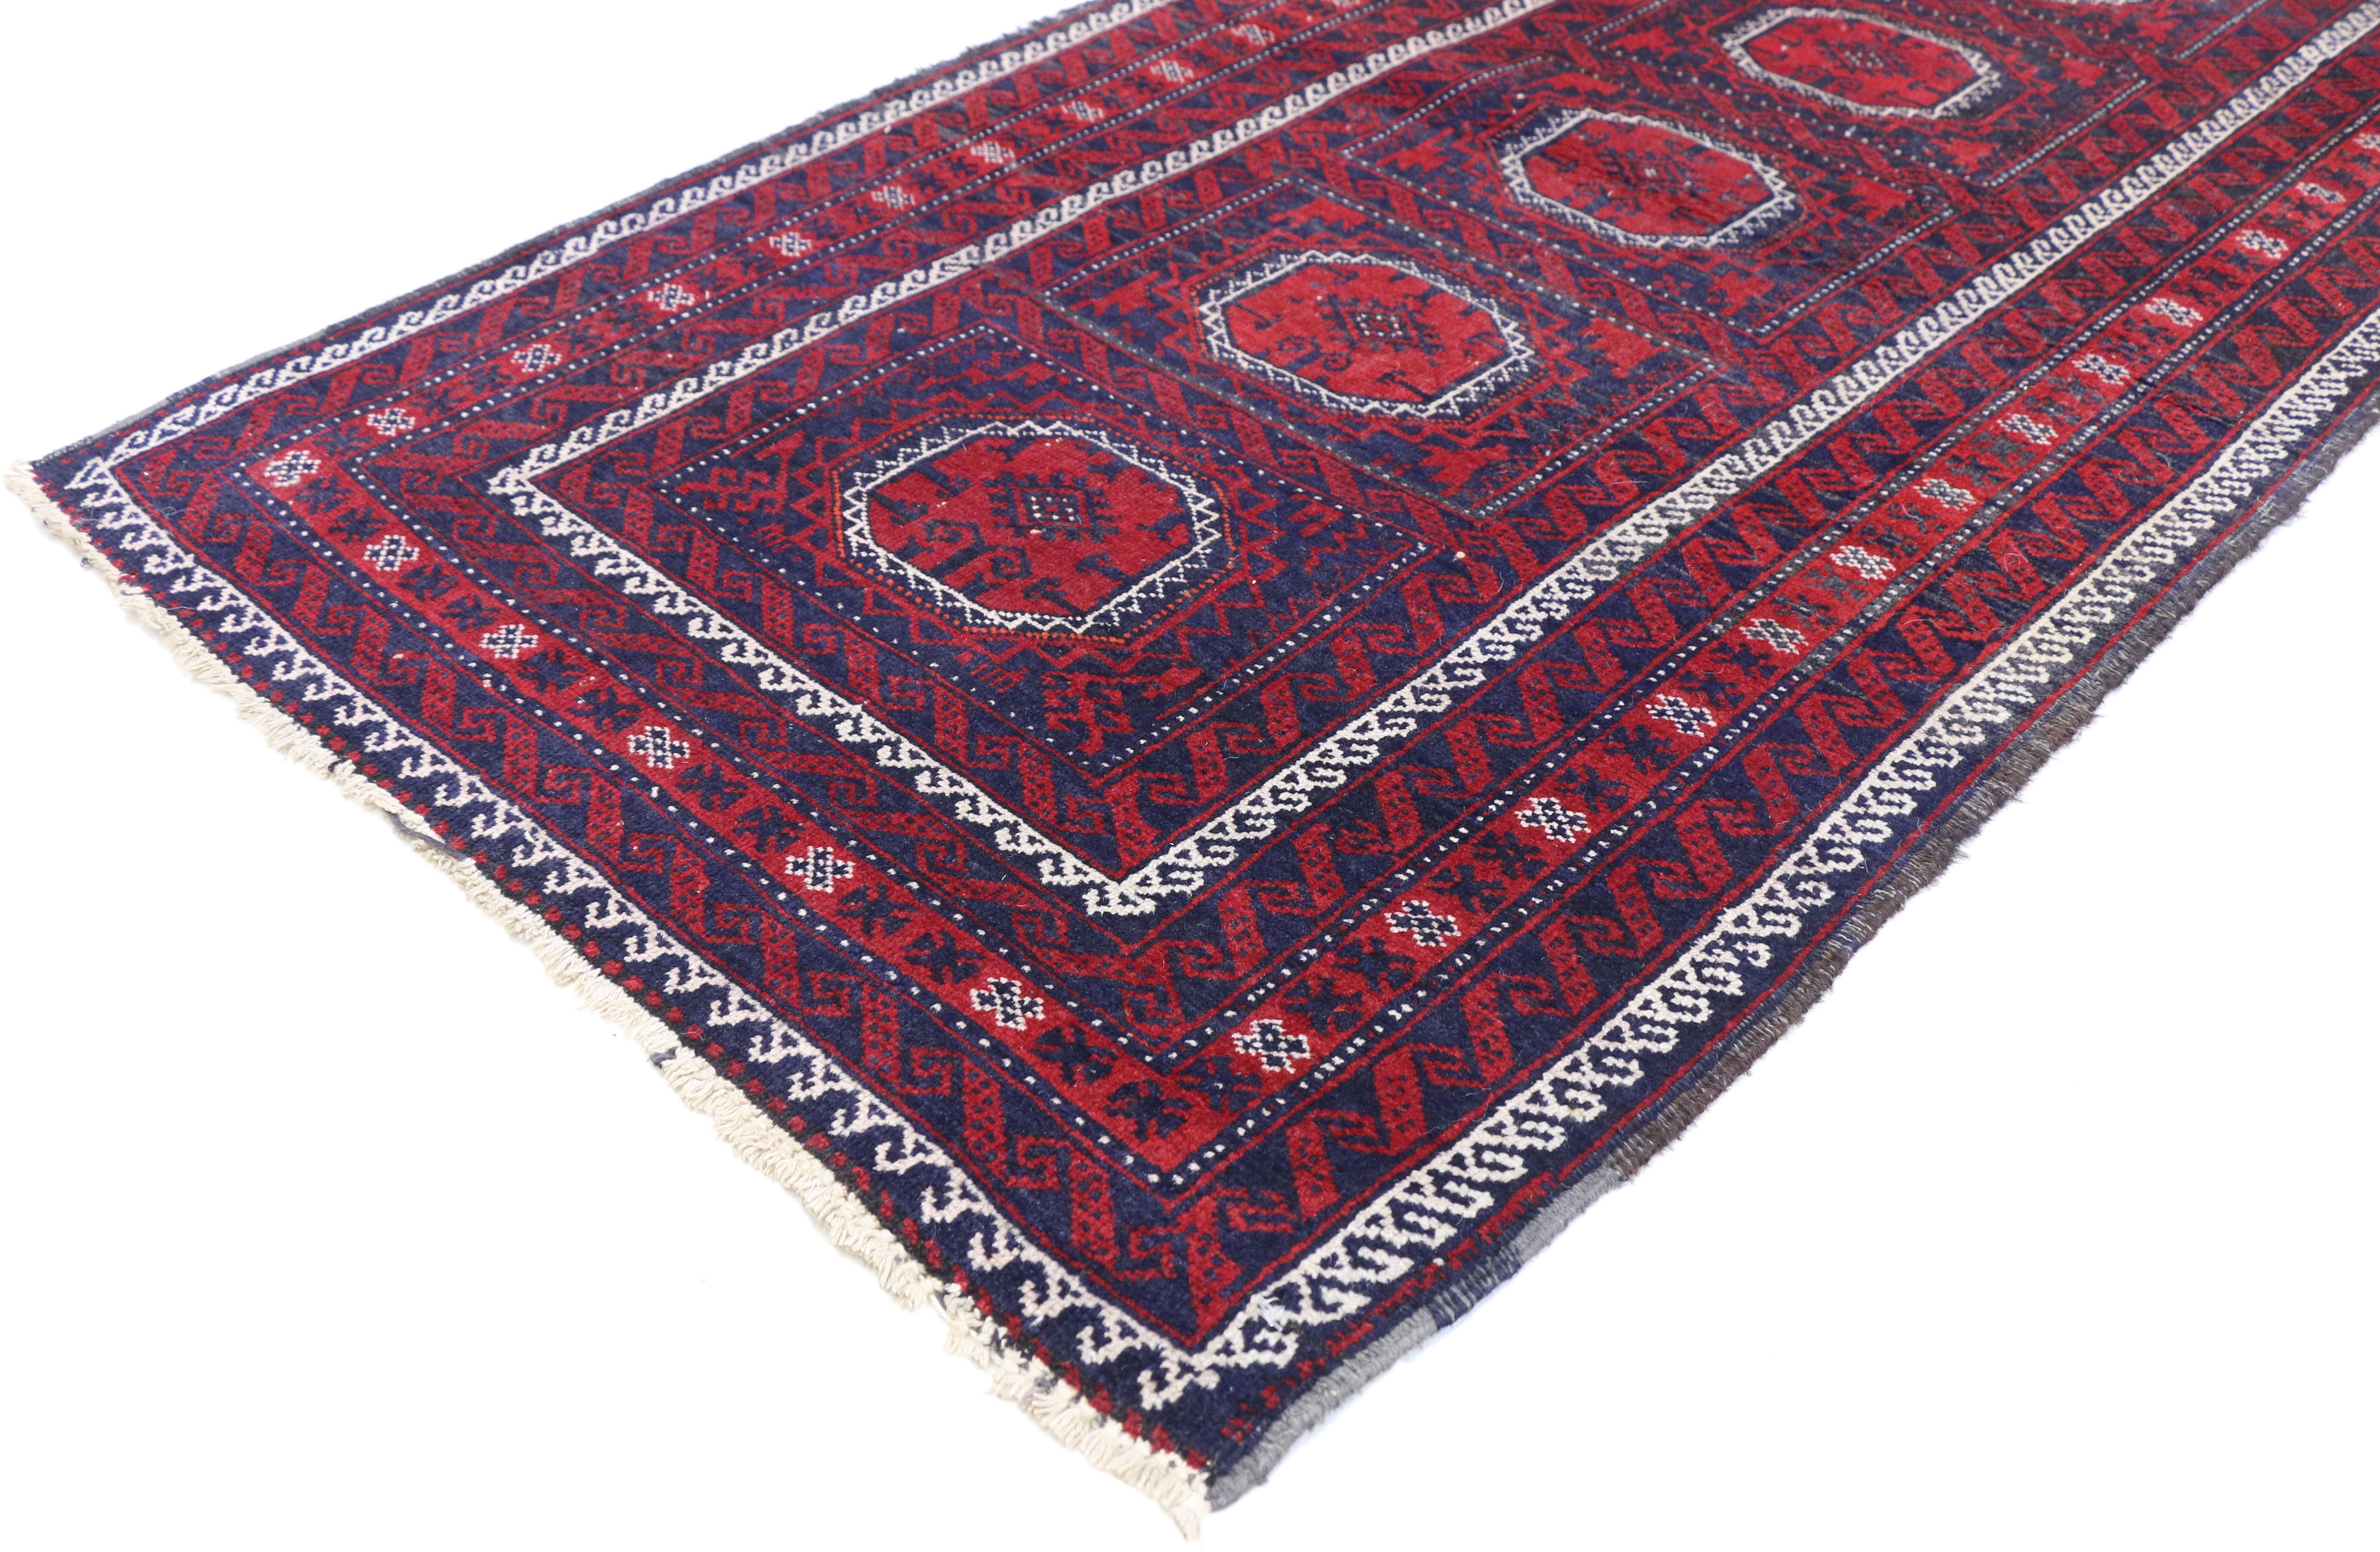 72044, Vintage Persian Baluch Rug with Jacobean Style and Saturated Colors. Exotic and alluring, tribal style takes its inspiration from this vintage Persian Baluch rug. Featuring five octagon medallions each filled with a diamond and secondary